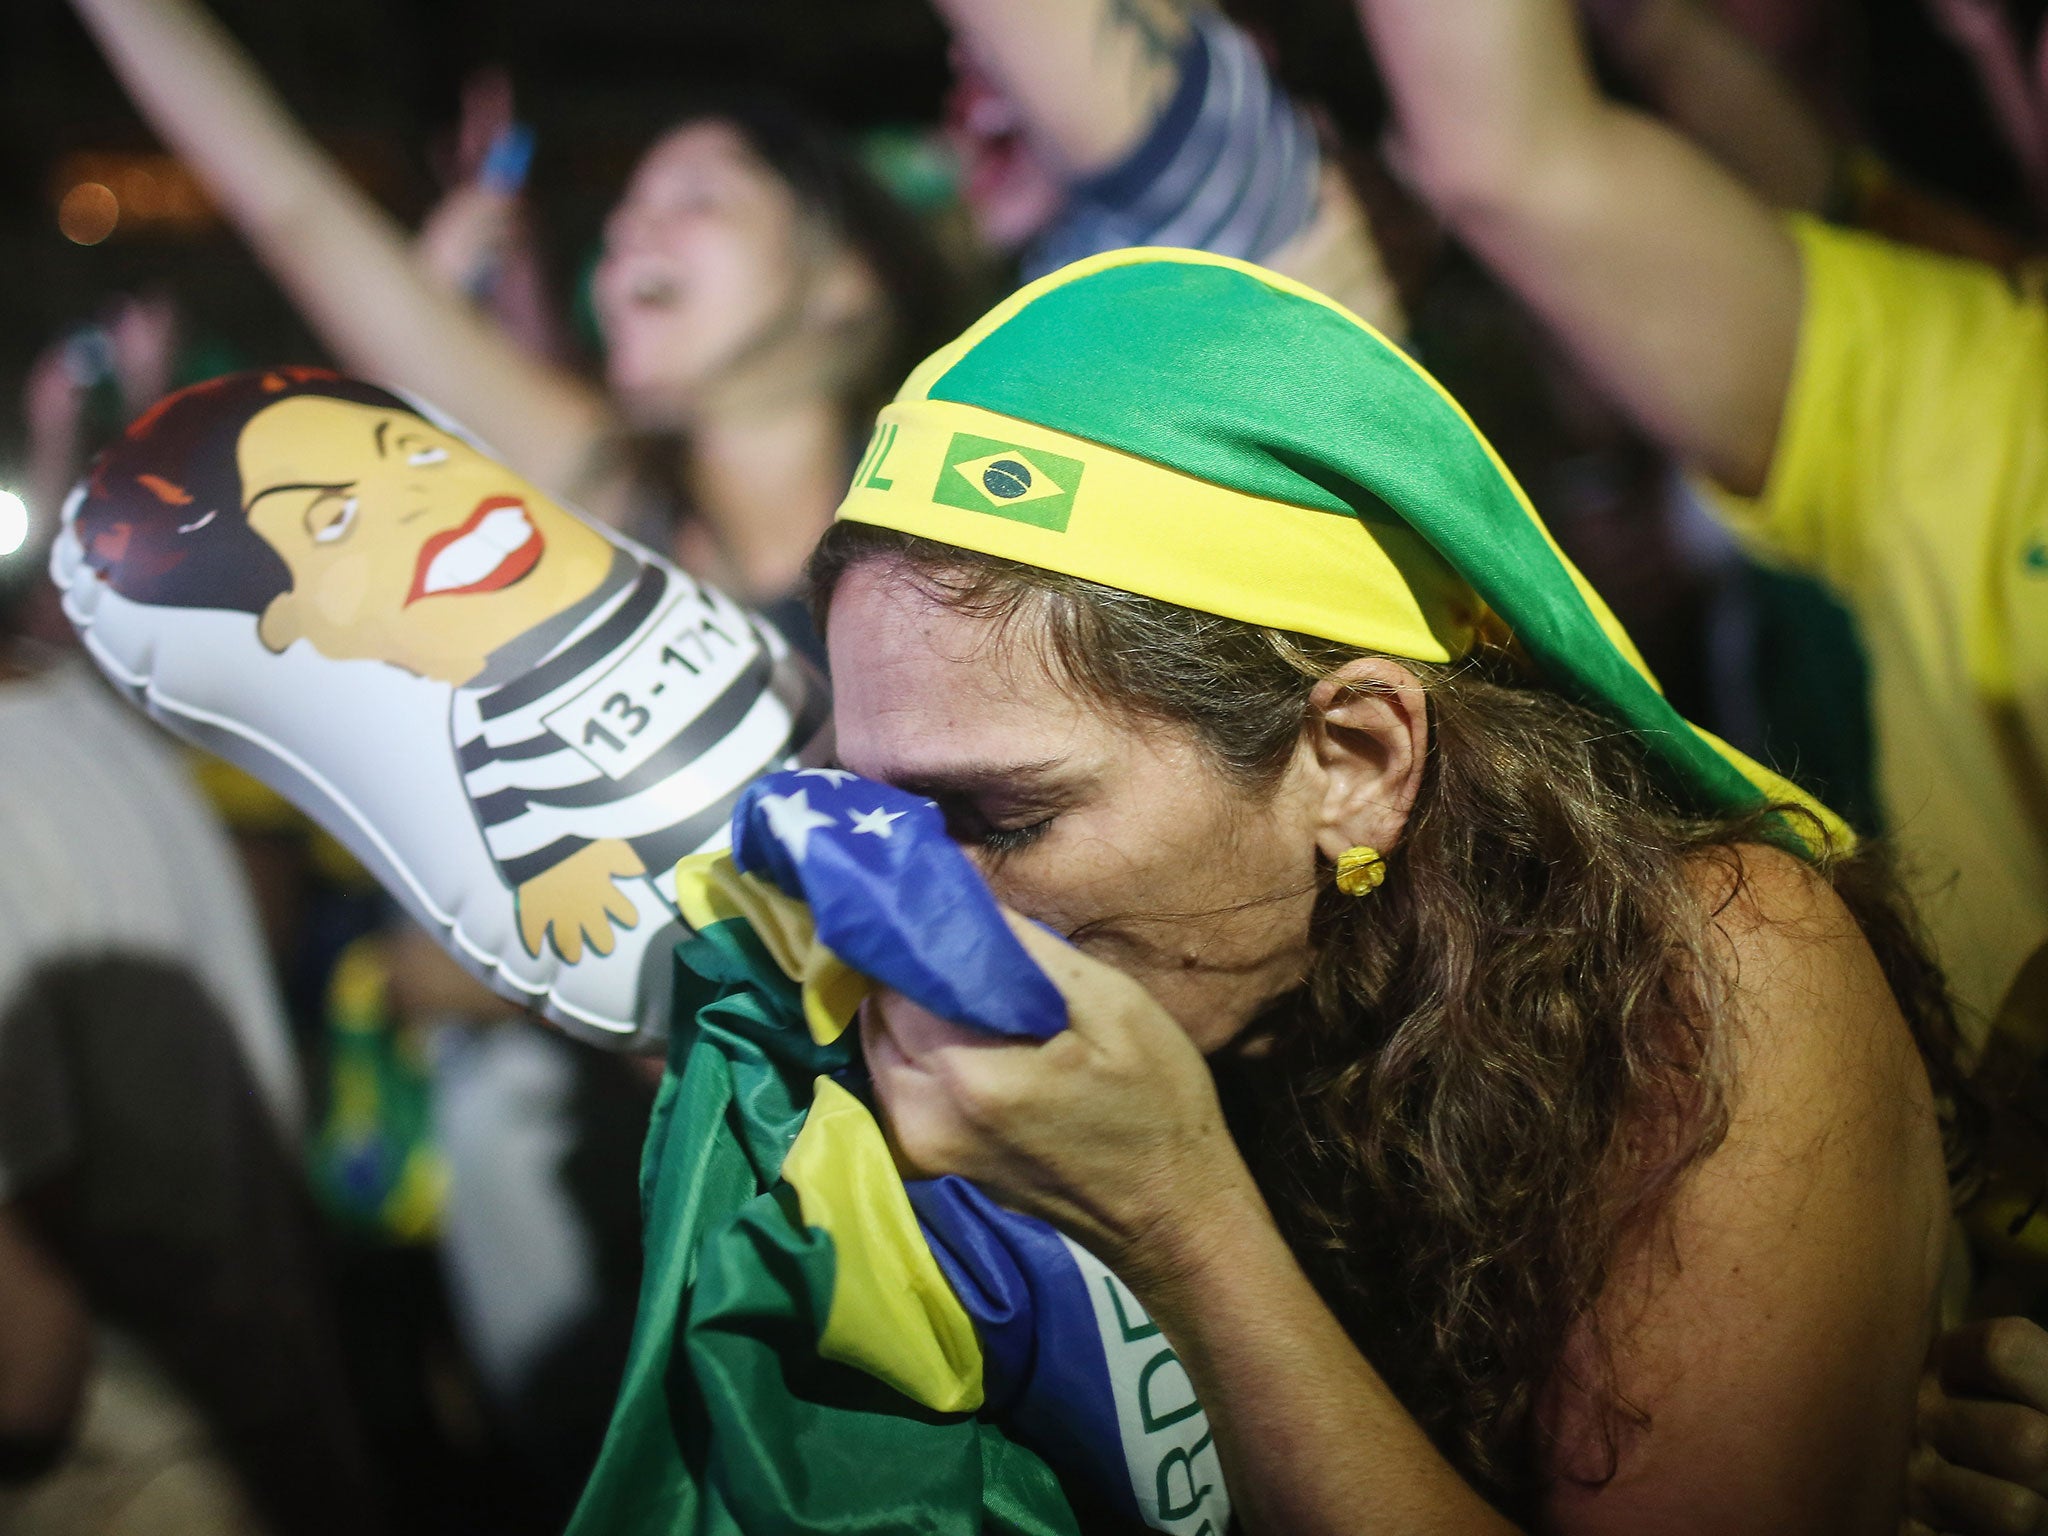 A pro-impeachment supporter kisses a Brazilian flag, as lower house deputies vote to approve the motion to continue the impeachment process of President Dilma Rousseff